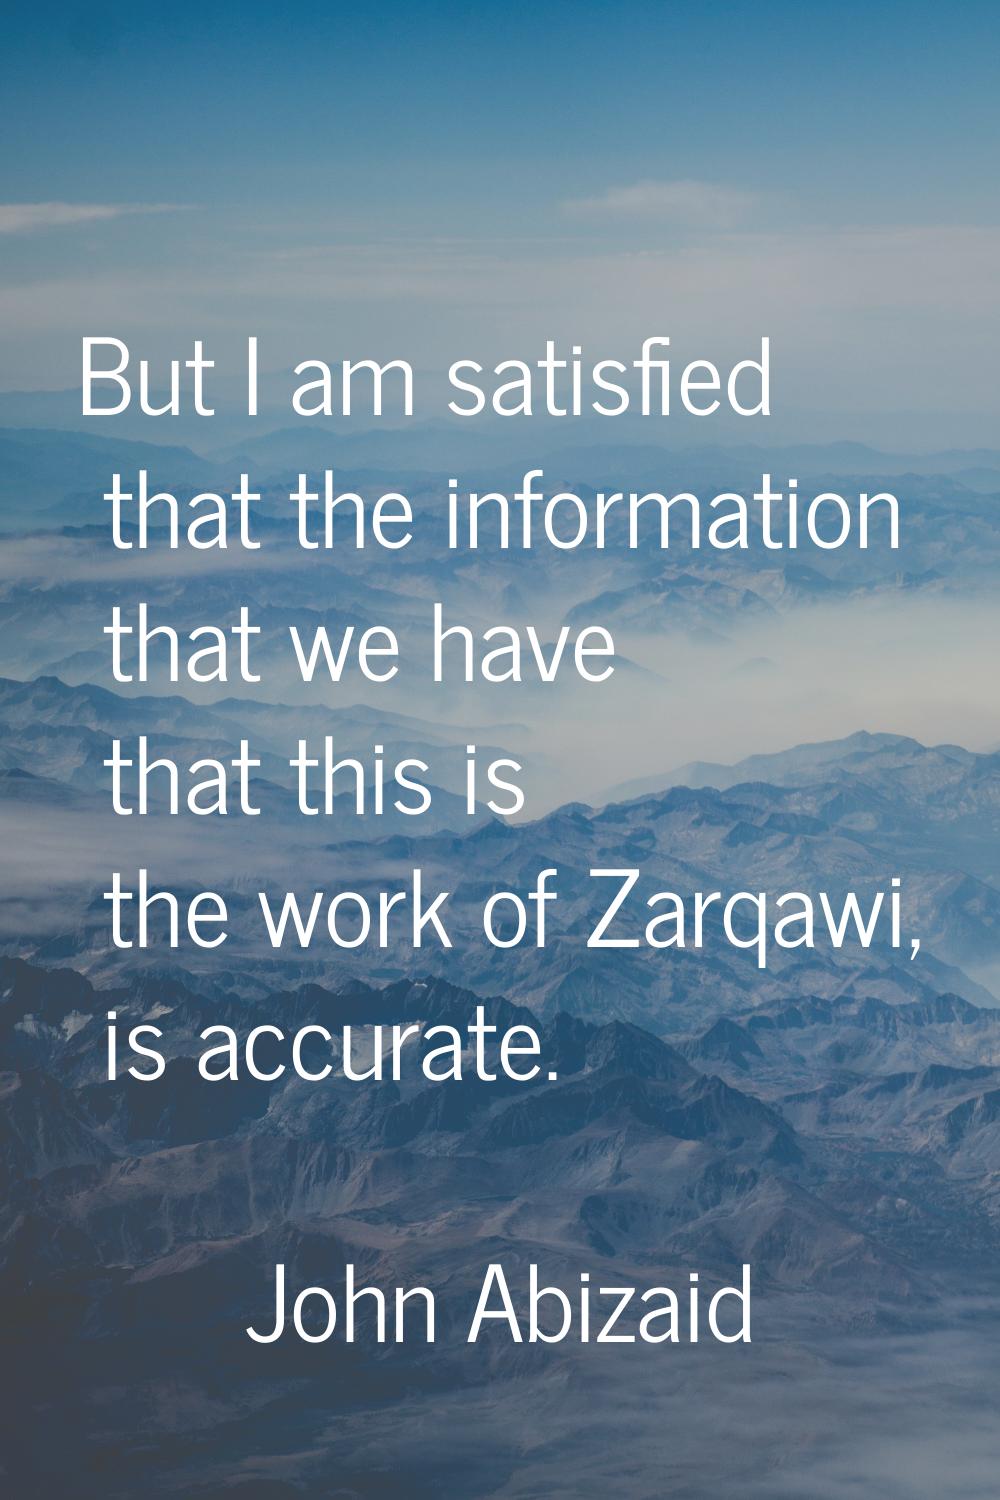 But I am satisfied that the information that we have that this is the work of Zarqawi, is accurate.